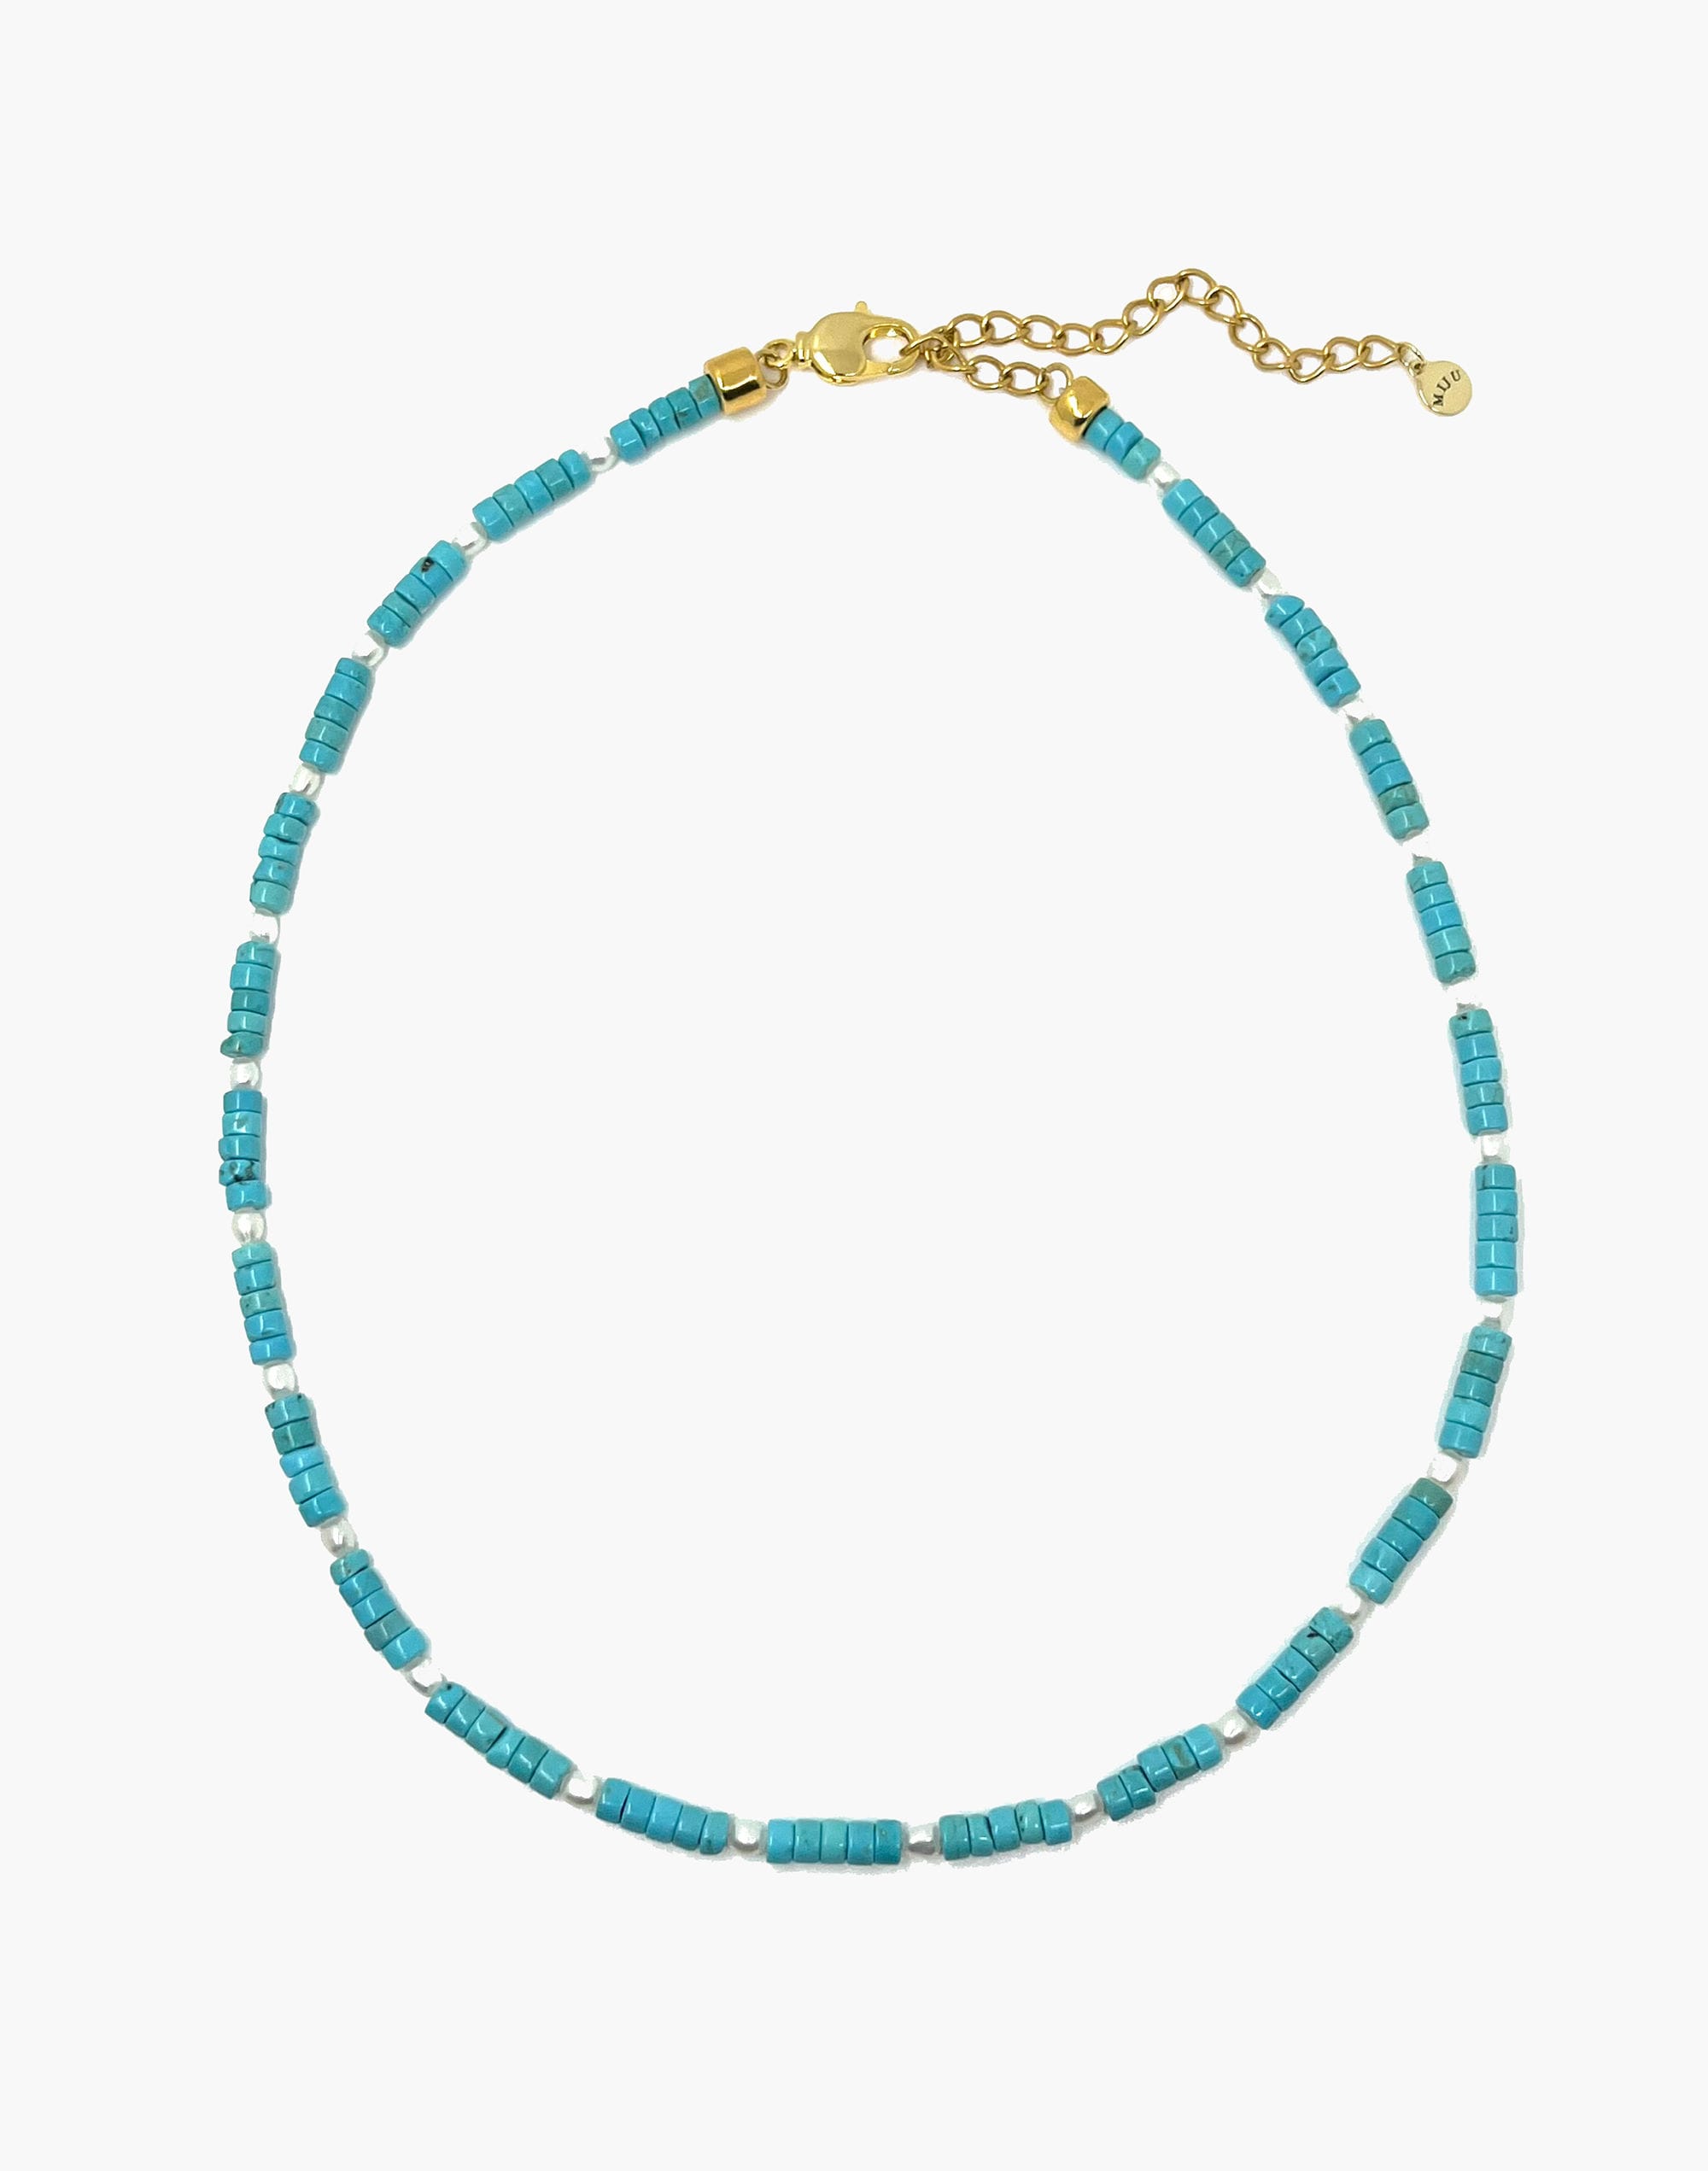 Madewell x MIJU Turquoise Beaded Del Mar Necklace